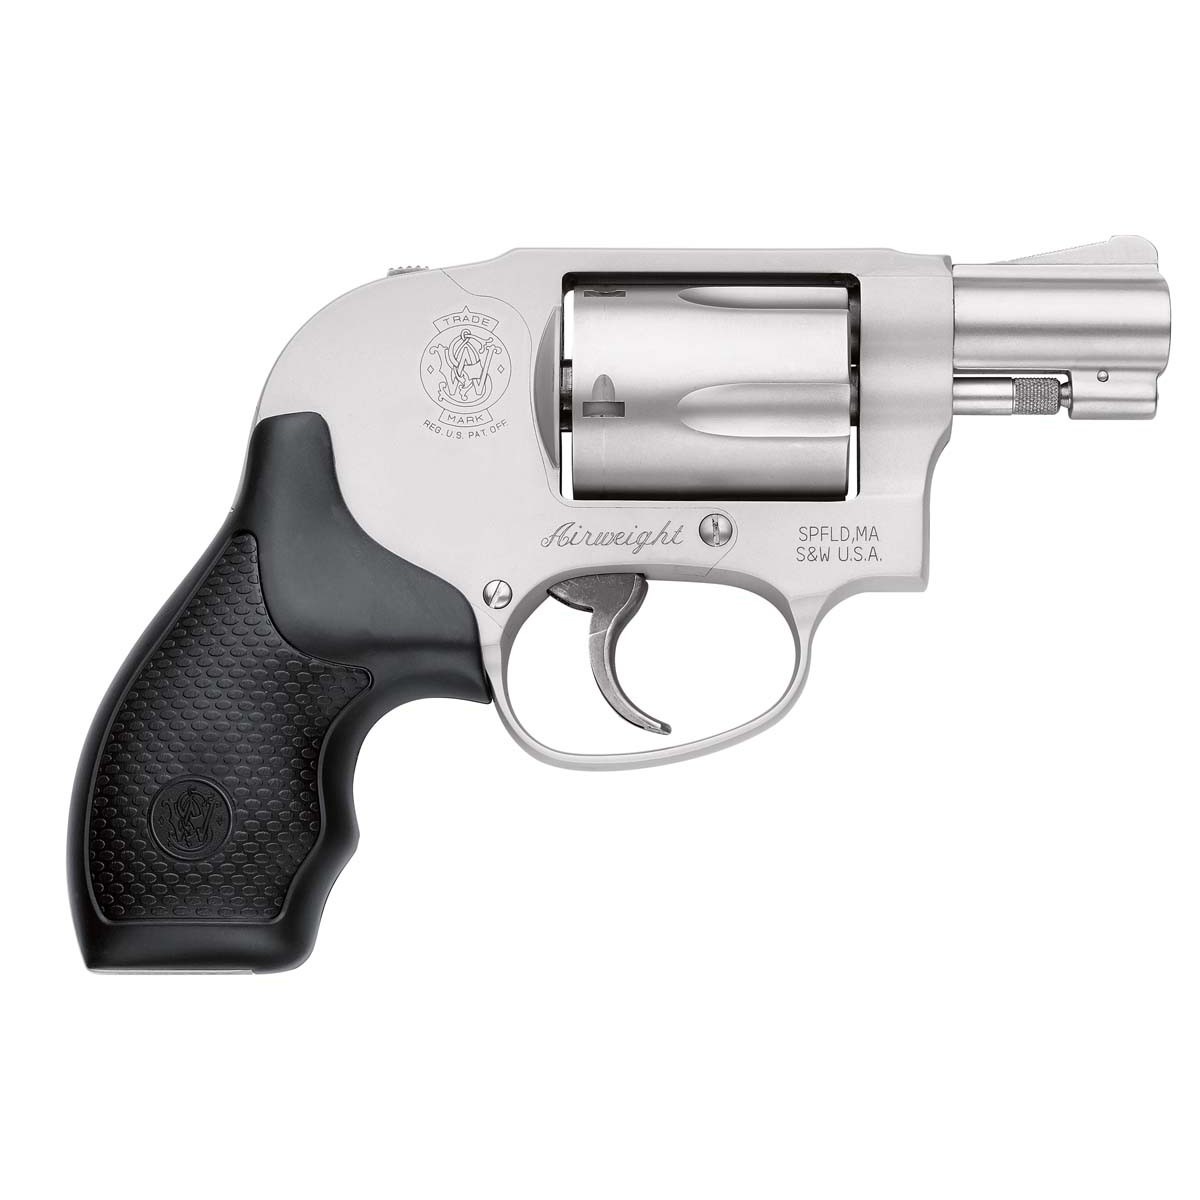 Smith and wesson model 638 for sale